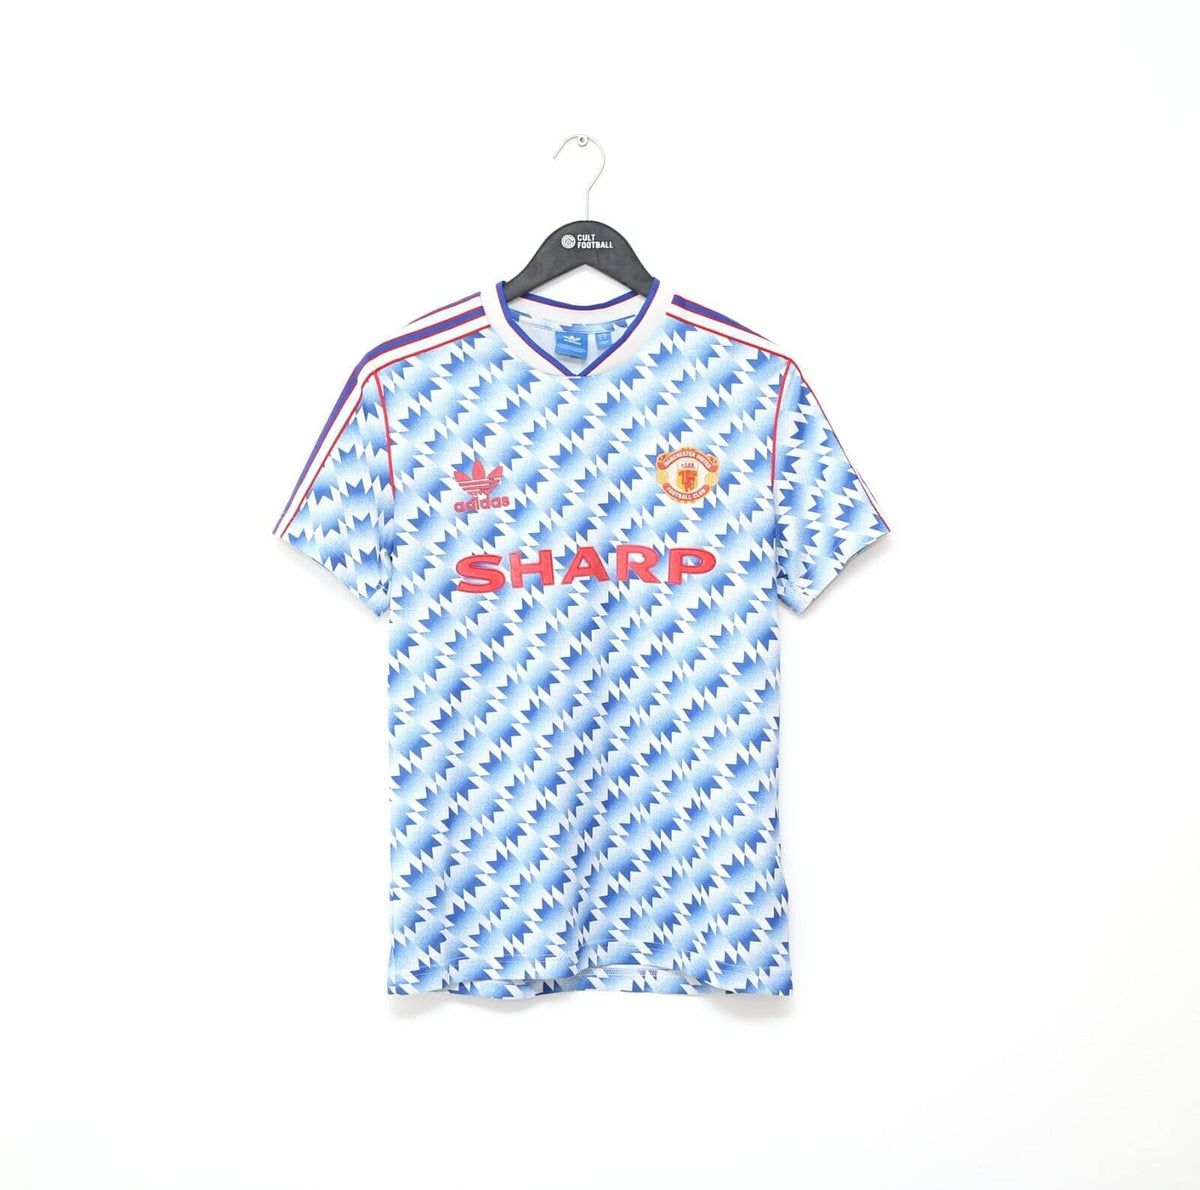 Manchester United 1990-92 Adidas Home Shirt Rereleased » The Kitman